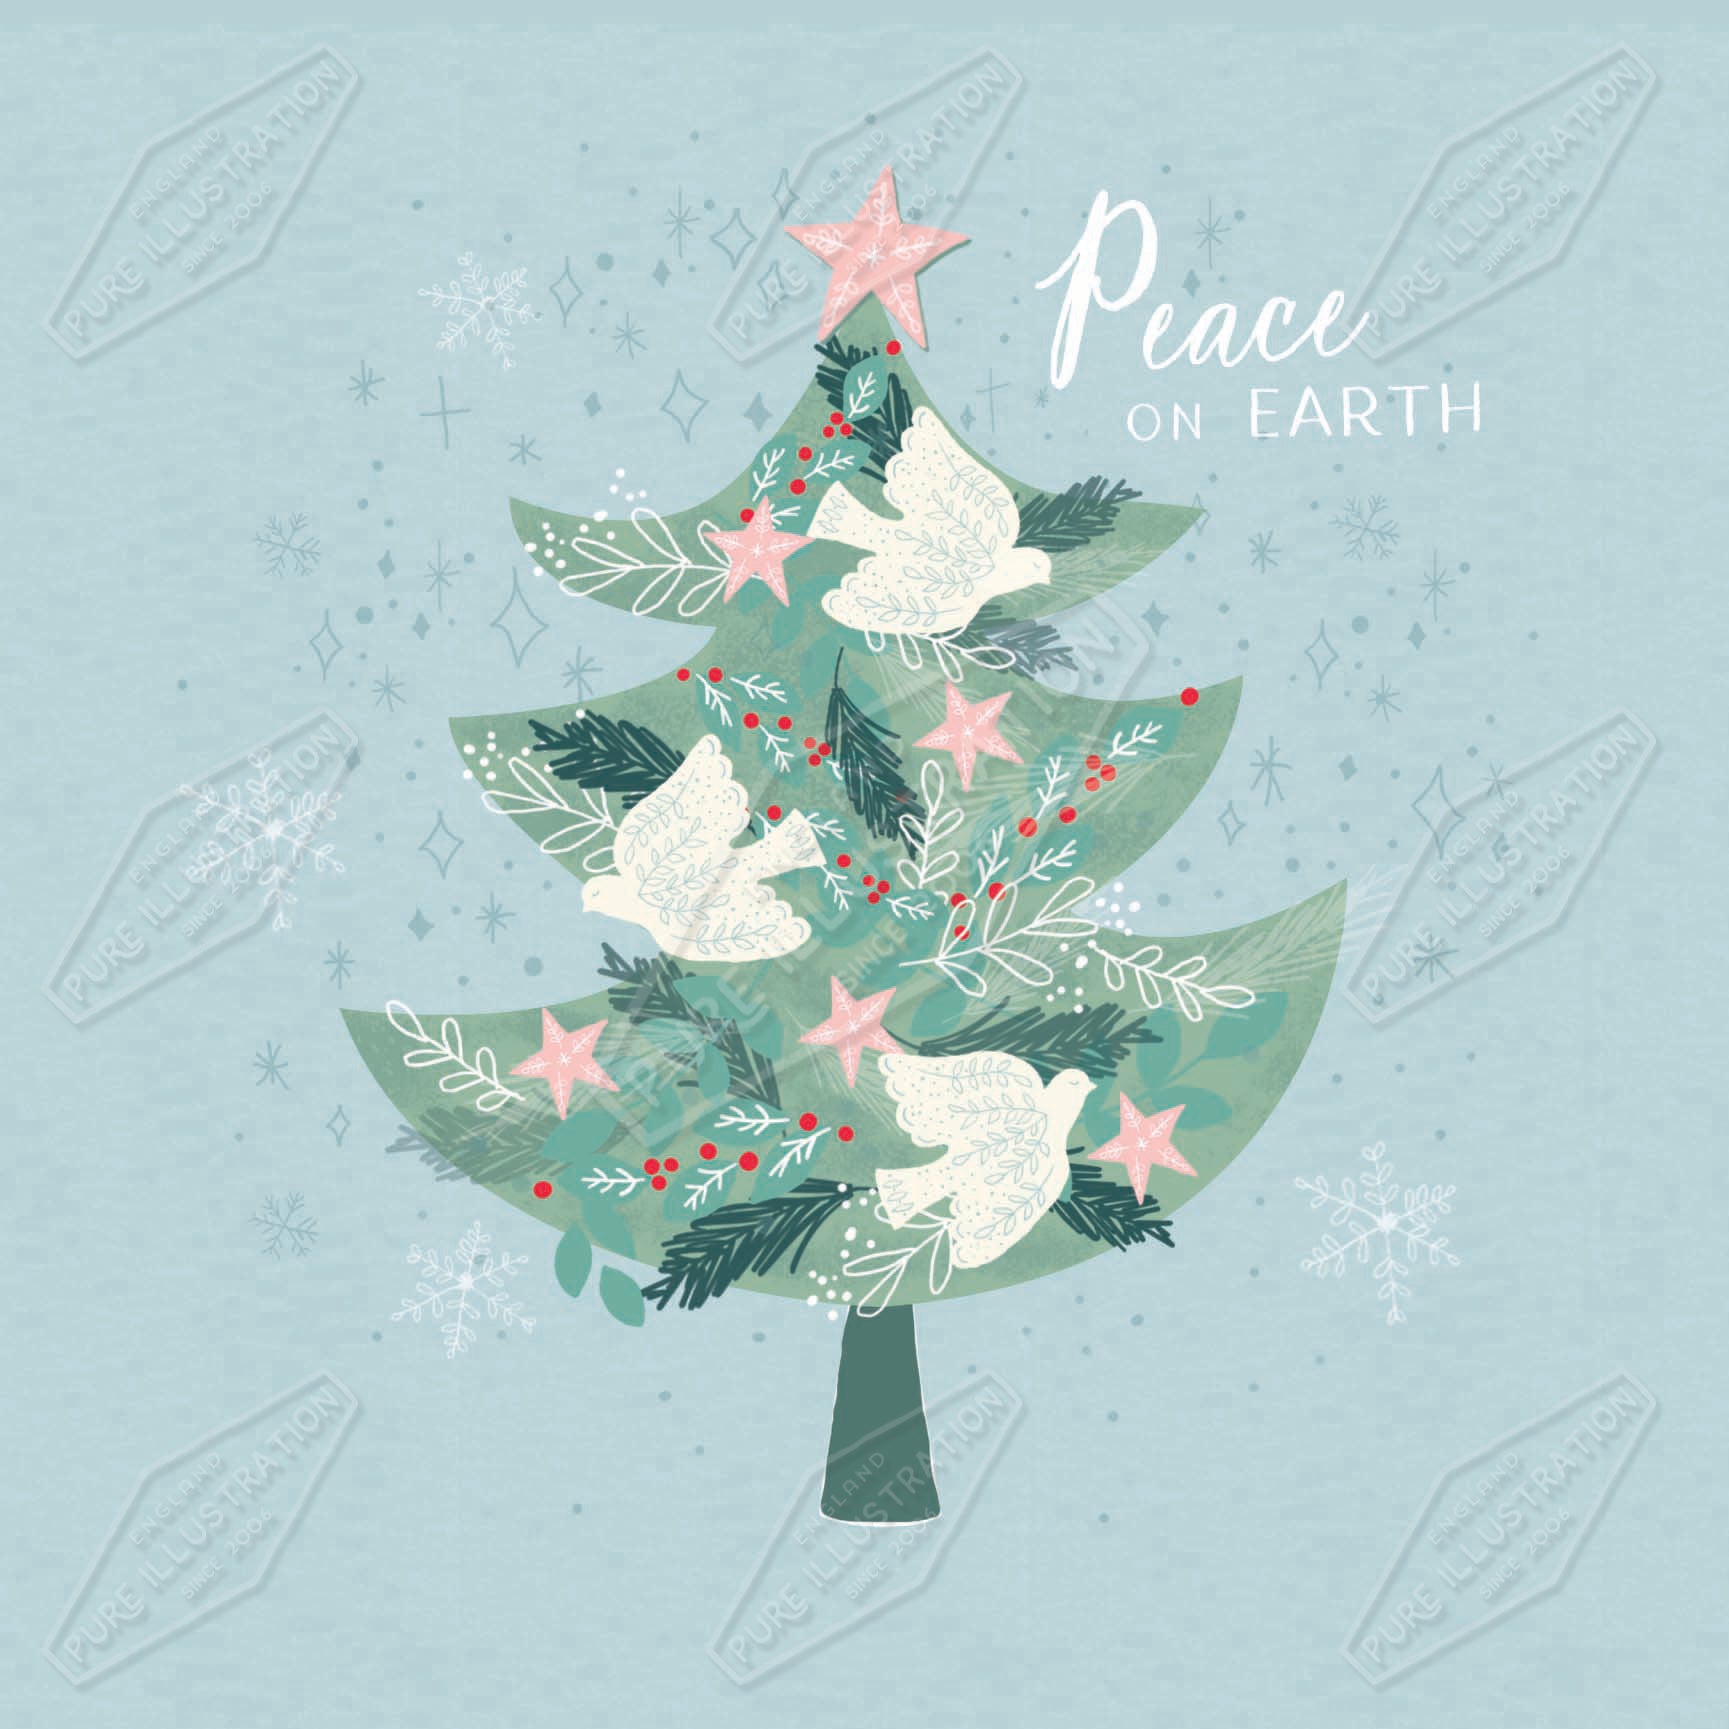 00035407SLA- Sarah Lake is represented by Pure Art Licensing Agency - Christmas Greeting Card Design